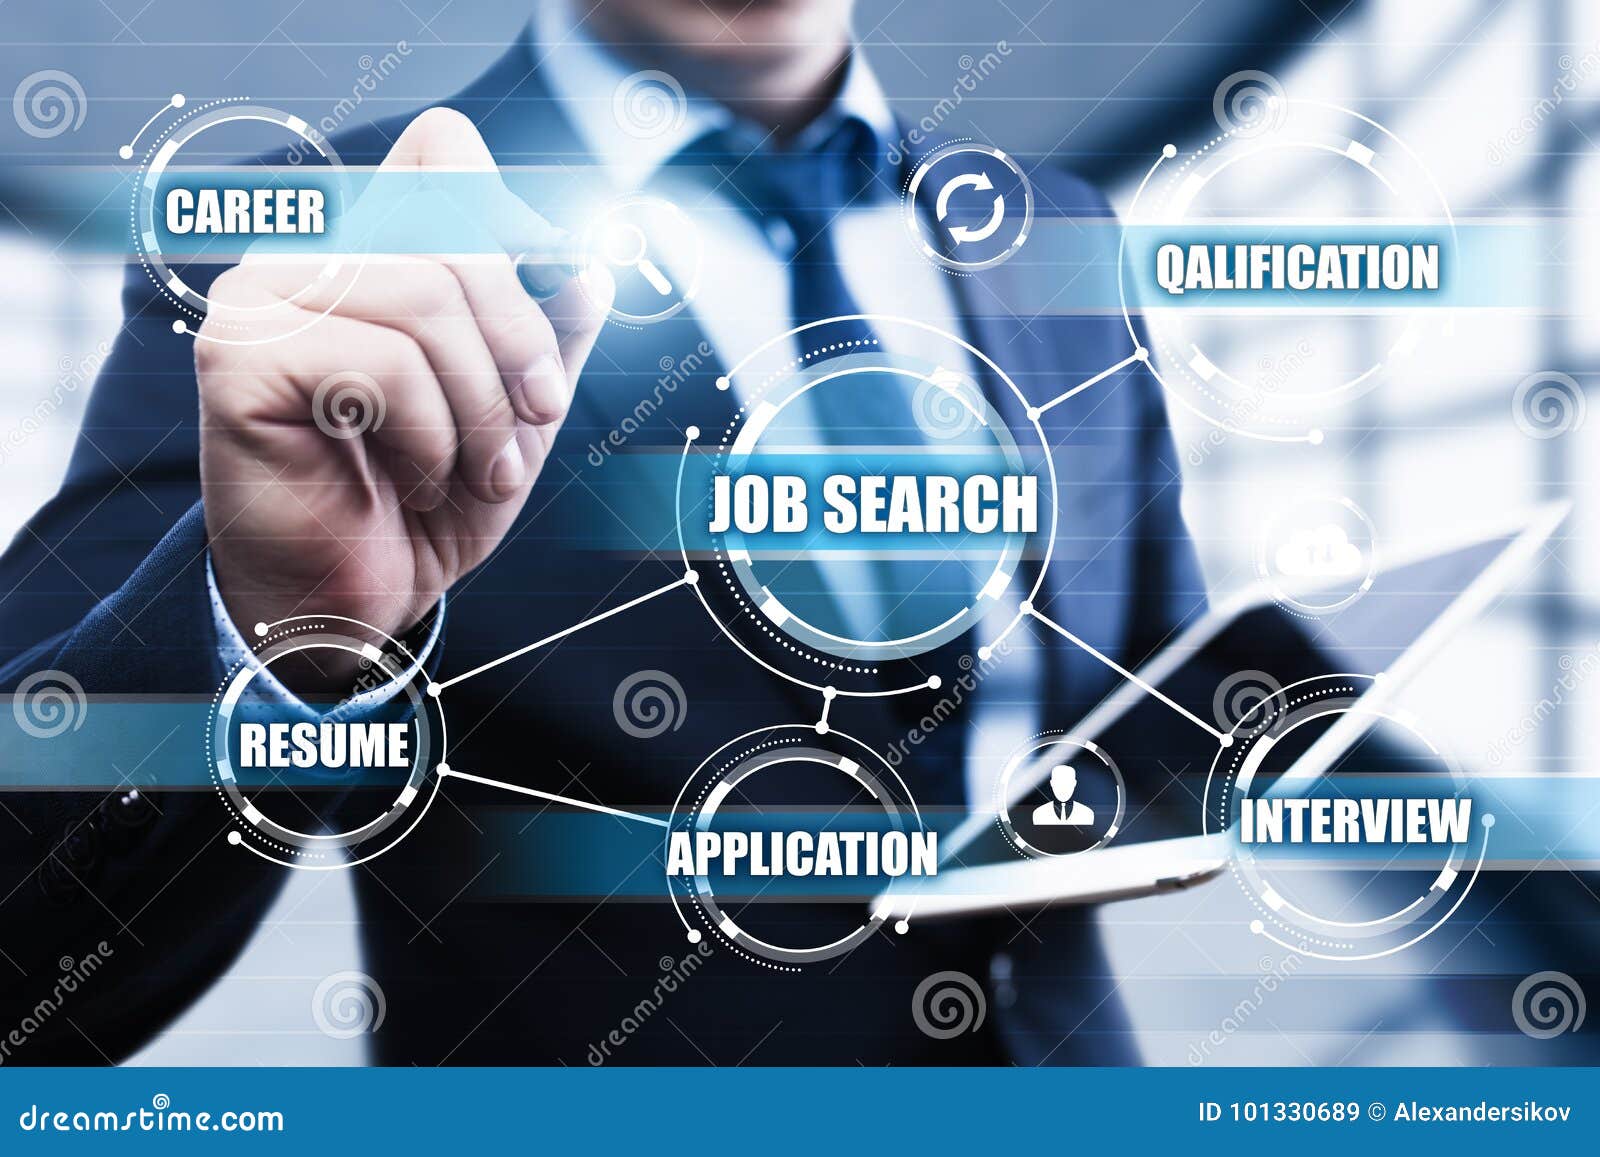 job search human resources recruitment career business internet technology concept